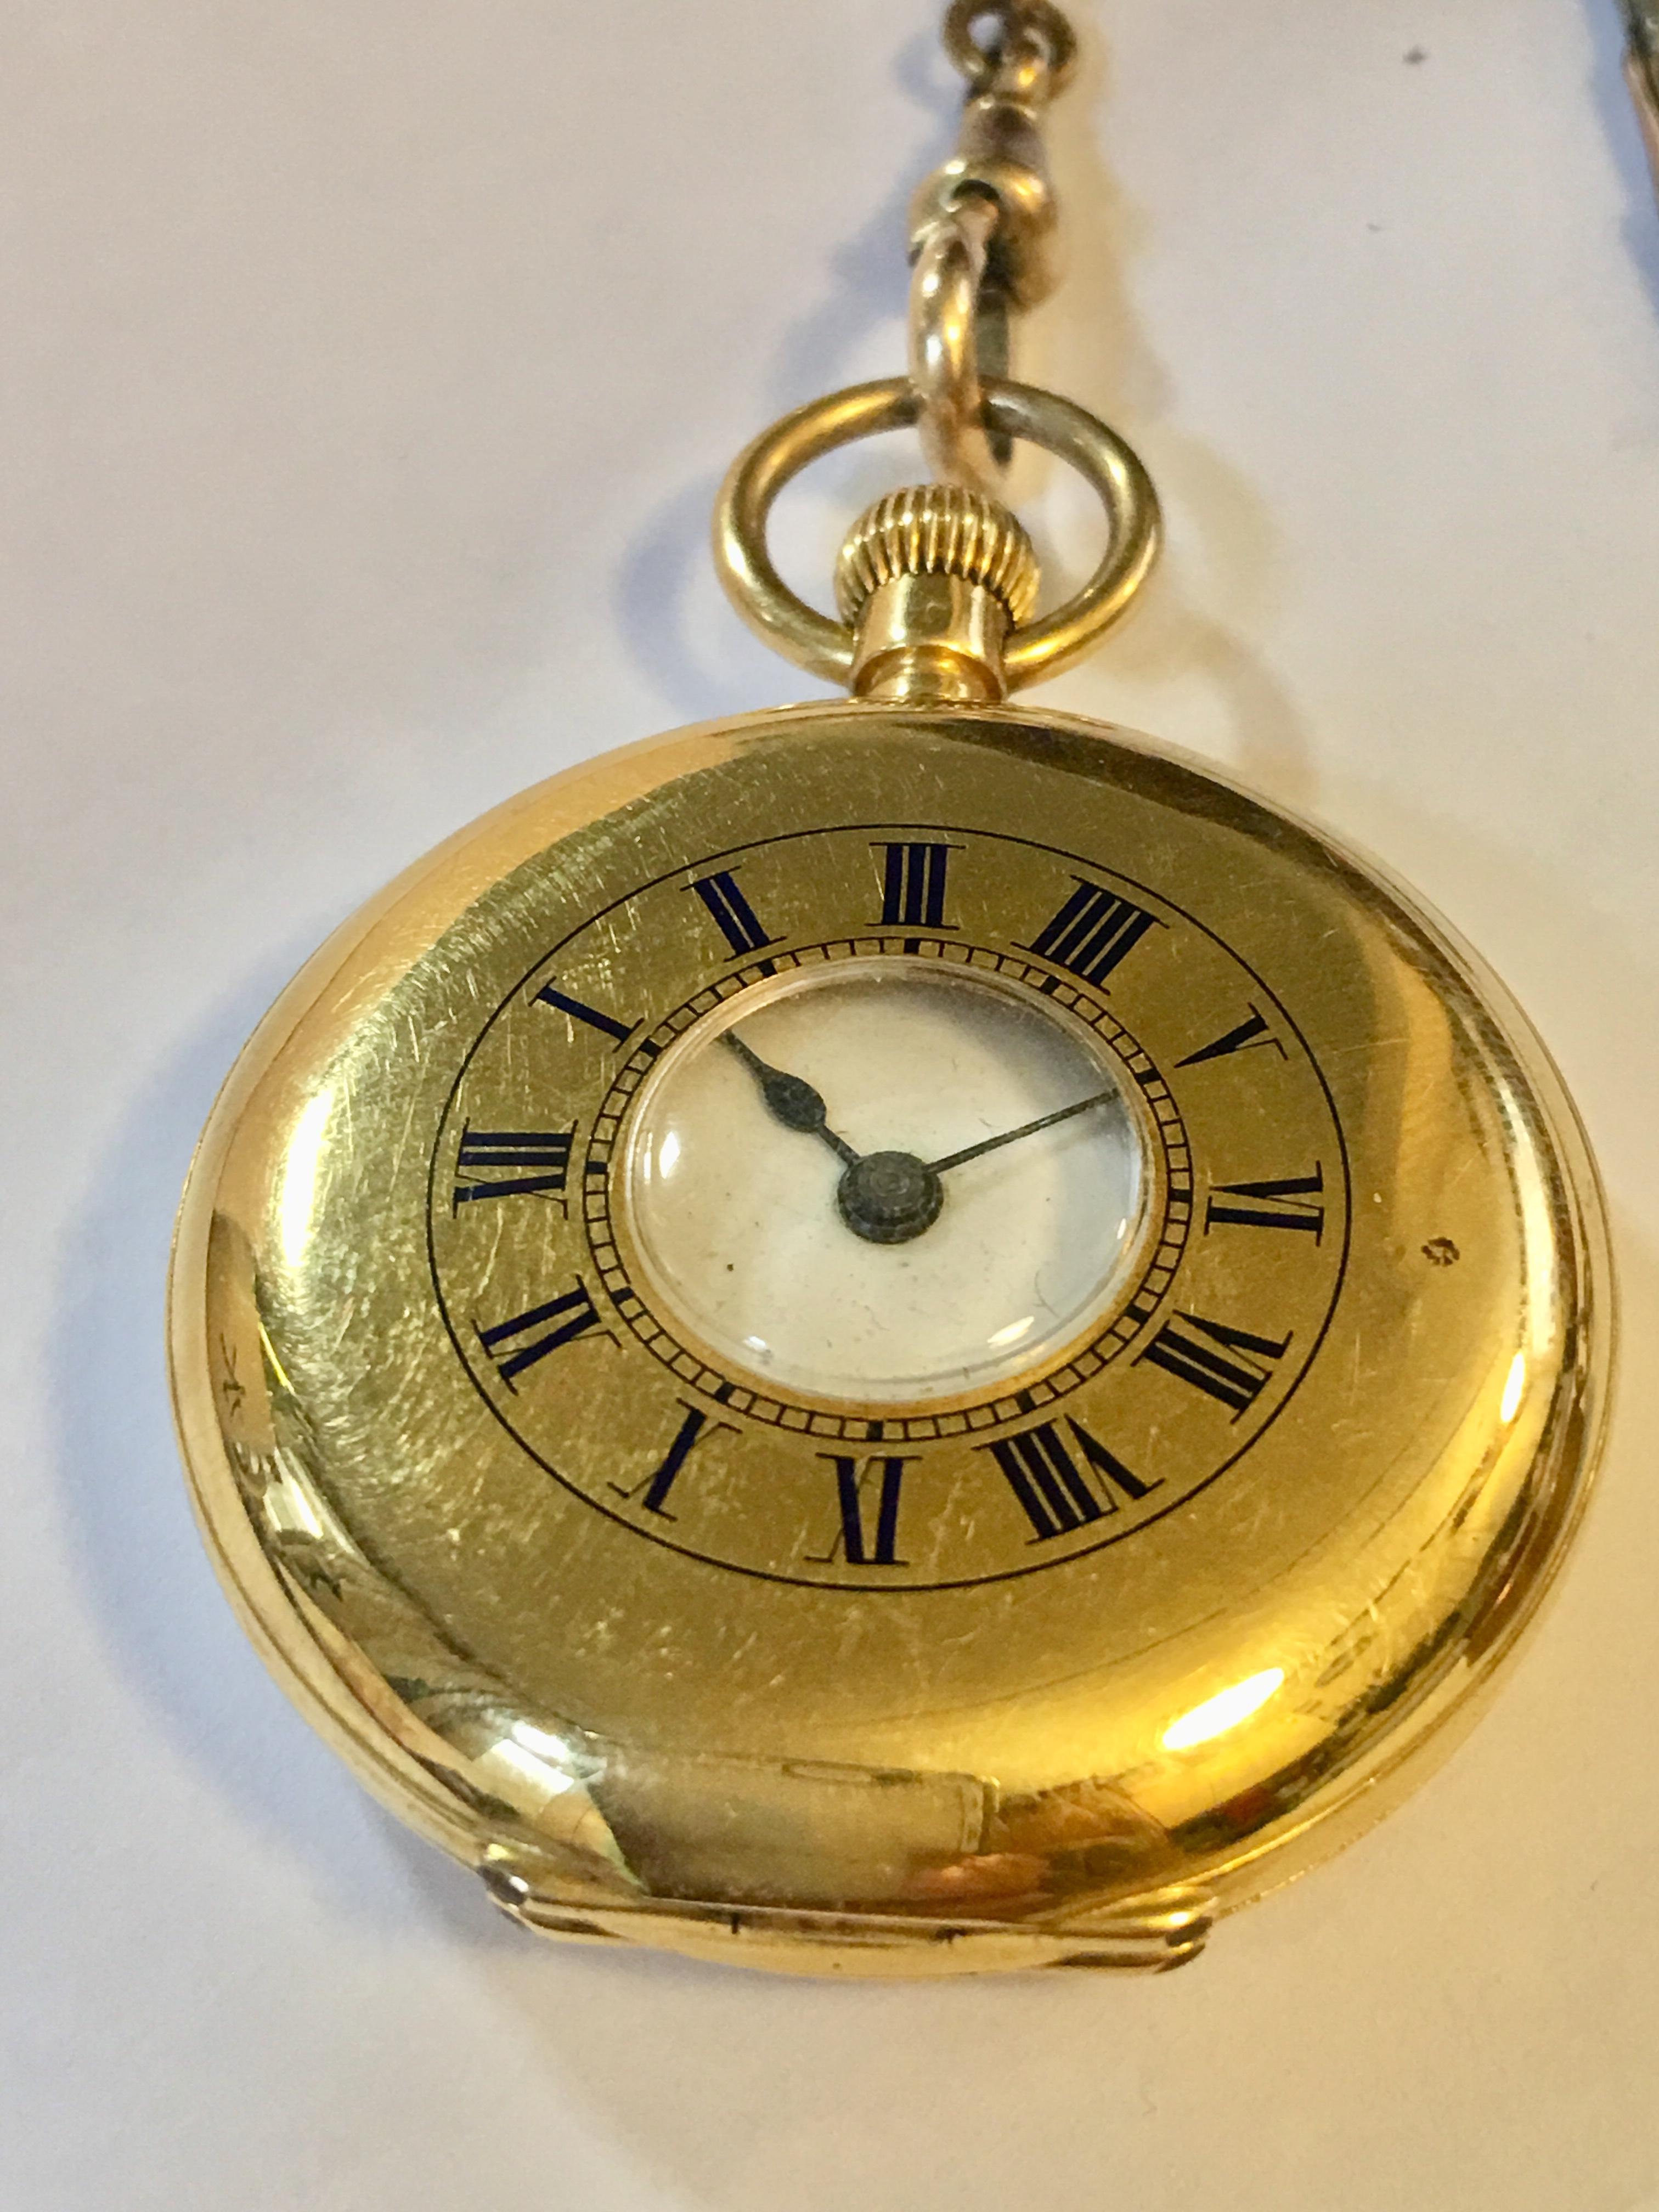 An 18-karat gold half hunter pocket watch with blue enamel chapter ring. The watch has an enamel white dial with black roman numerals. With a smooth stem wind and in a clean condition. The watch also comes with a small chain that has a mini compass.